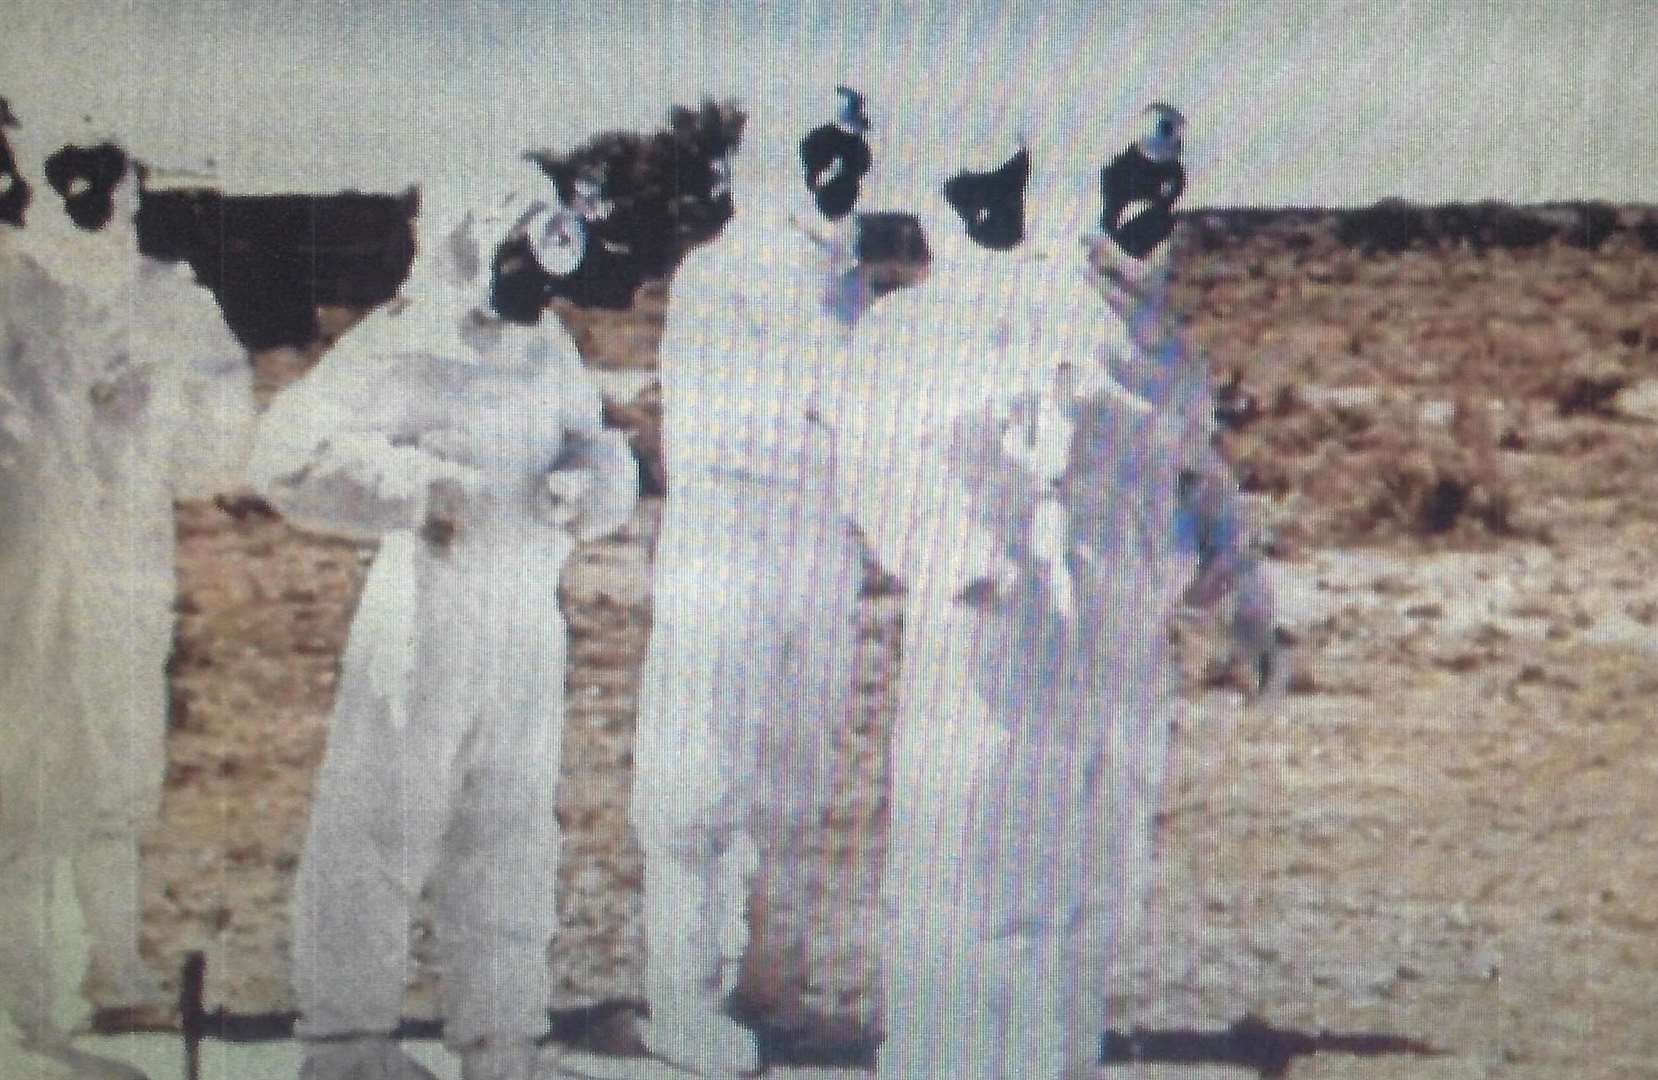 The scientists from the Atomic Weapons Research Establishment were equipped with full protective gear